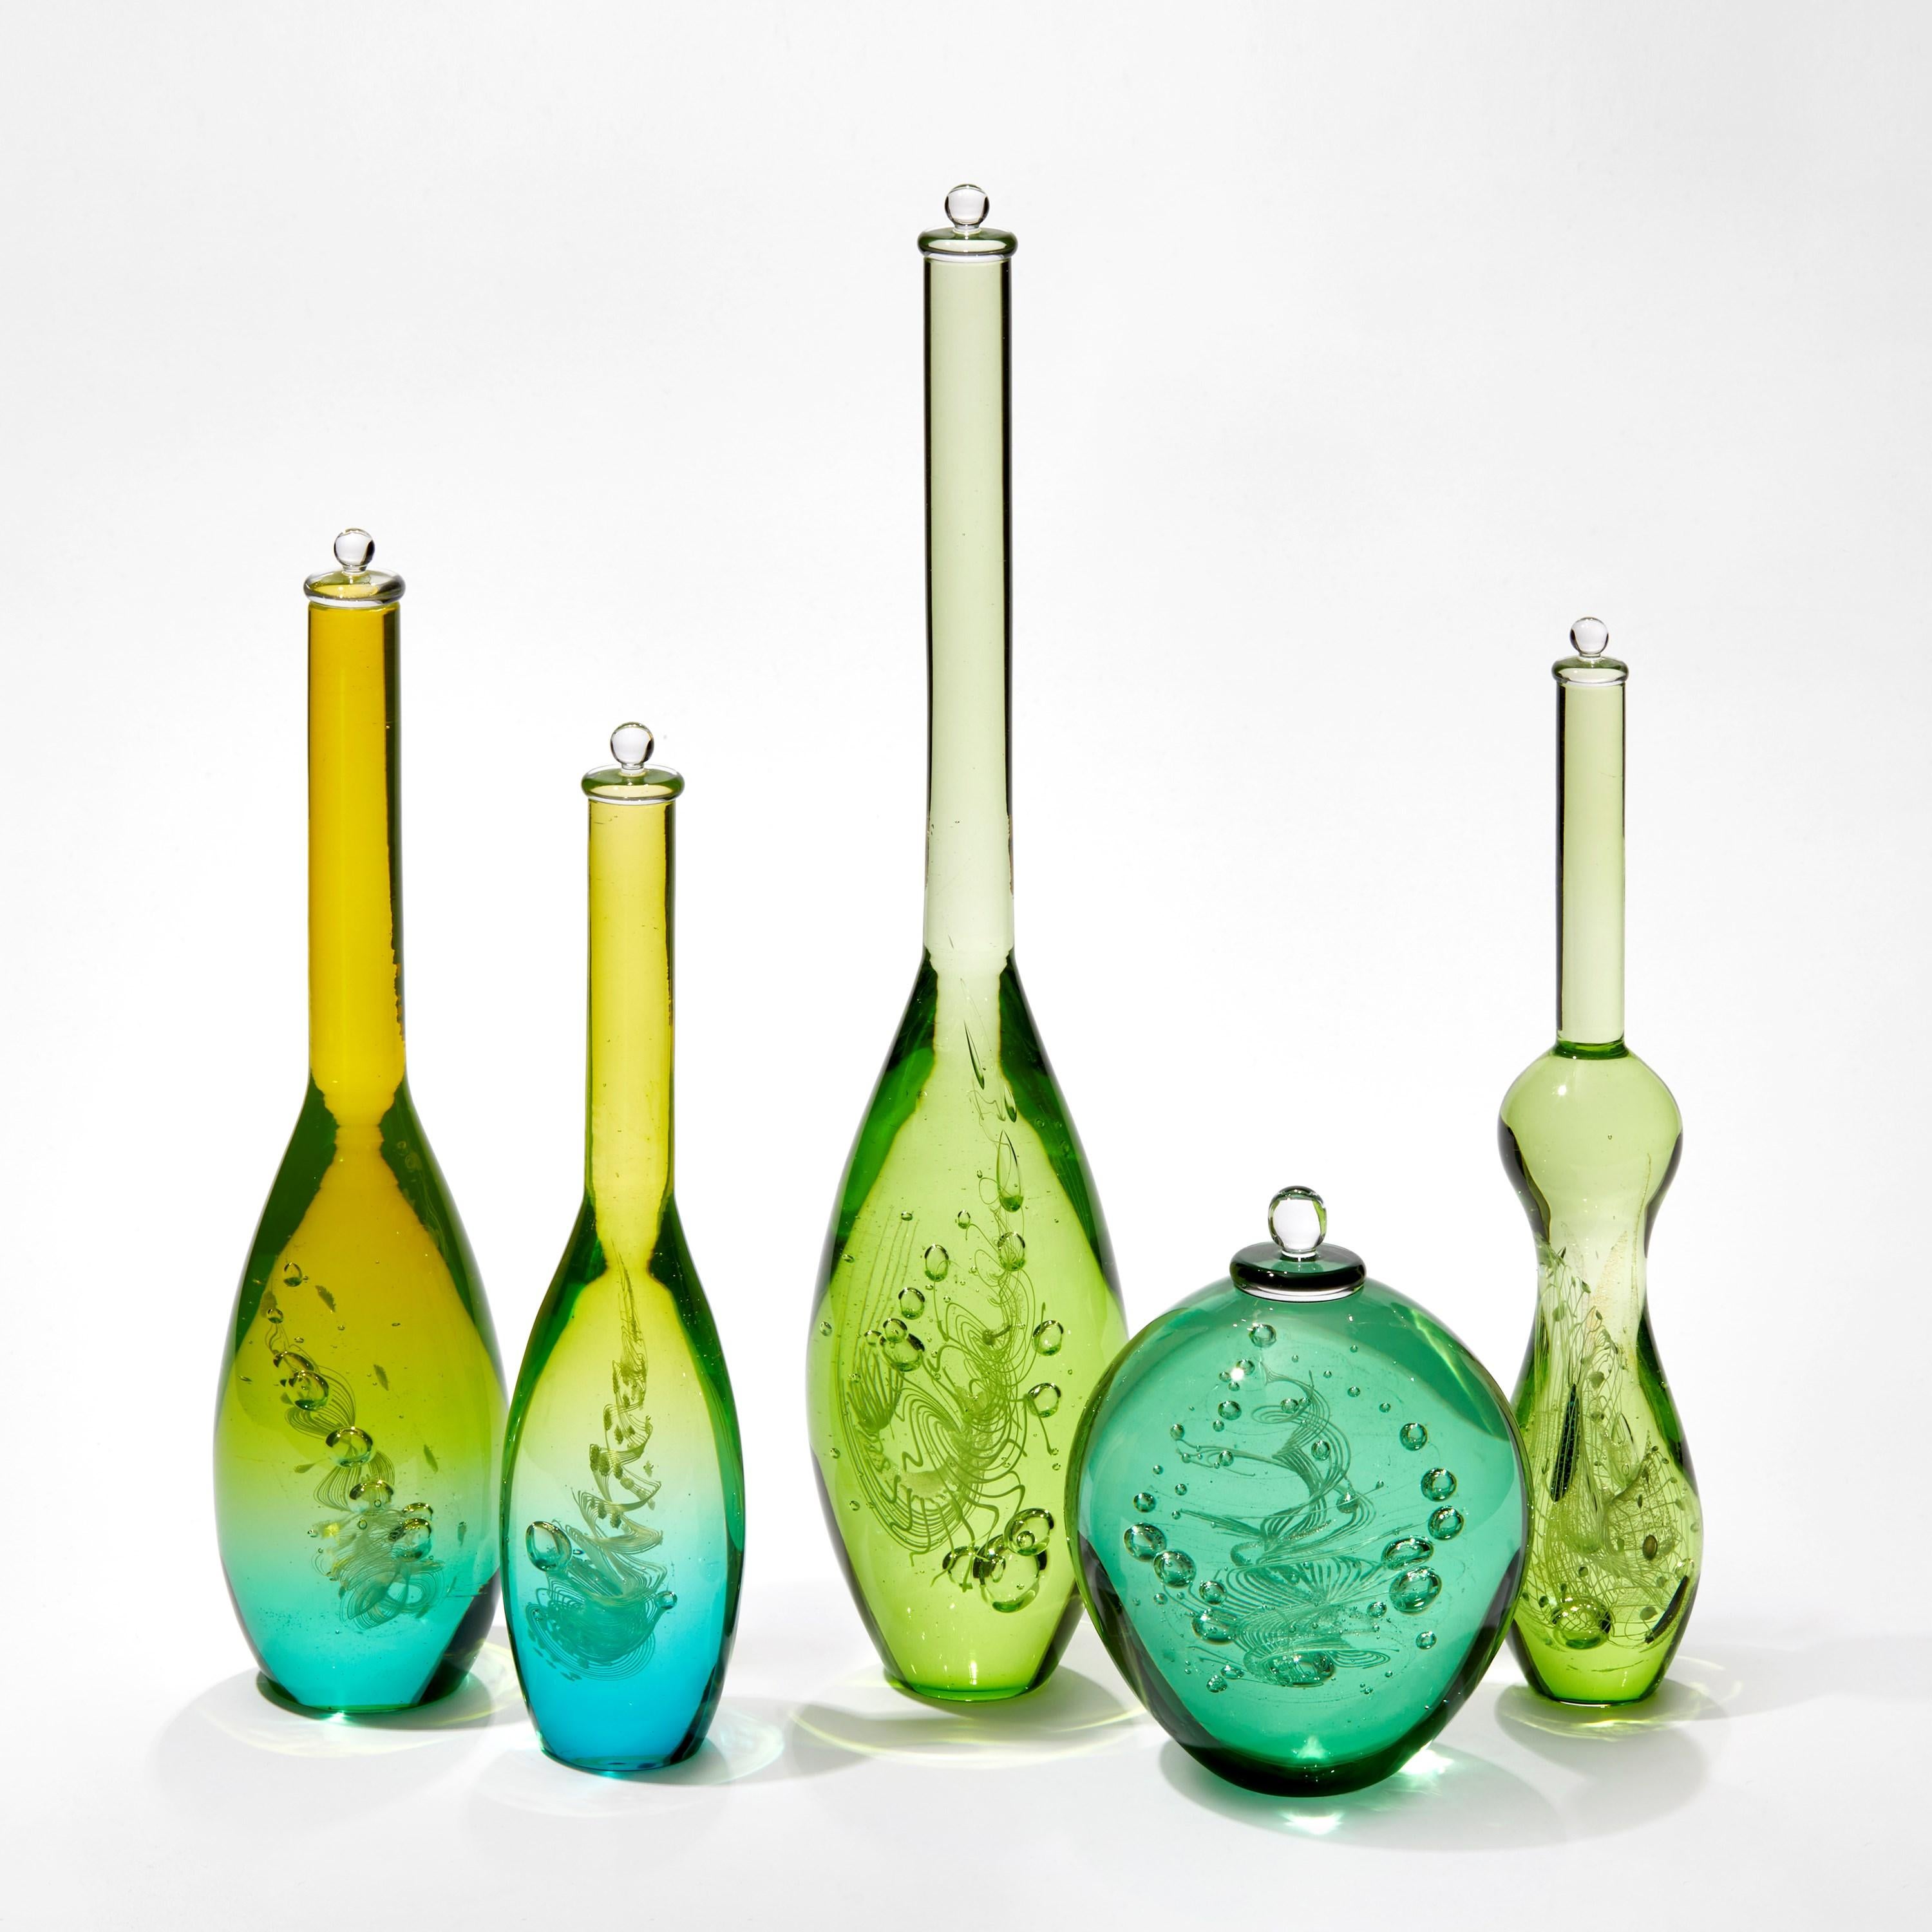 'DNA Sequence III' is a unique glass installation (consisting of 5 individual elements) by the British artist, Louis Thompson.

Accomplished glass artist Thompson explores illusion and the perceptions of glass, fascinated by the haptic experience